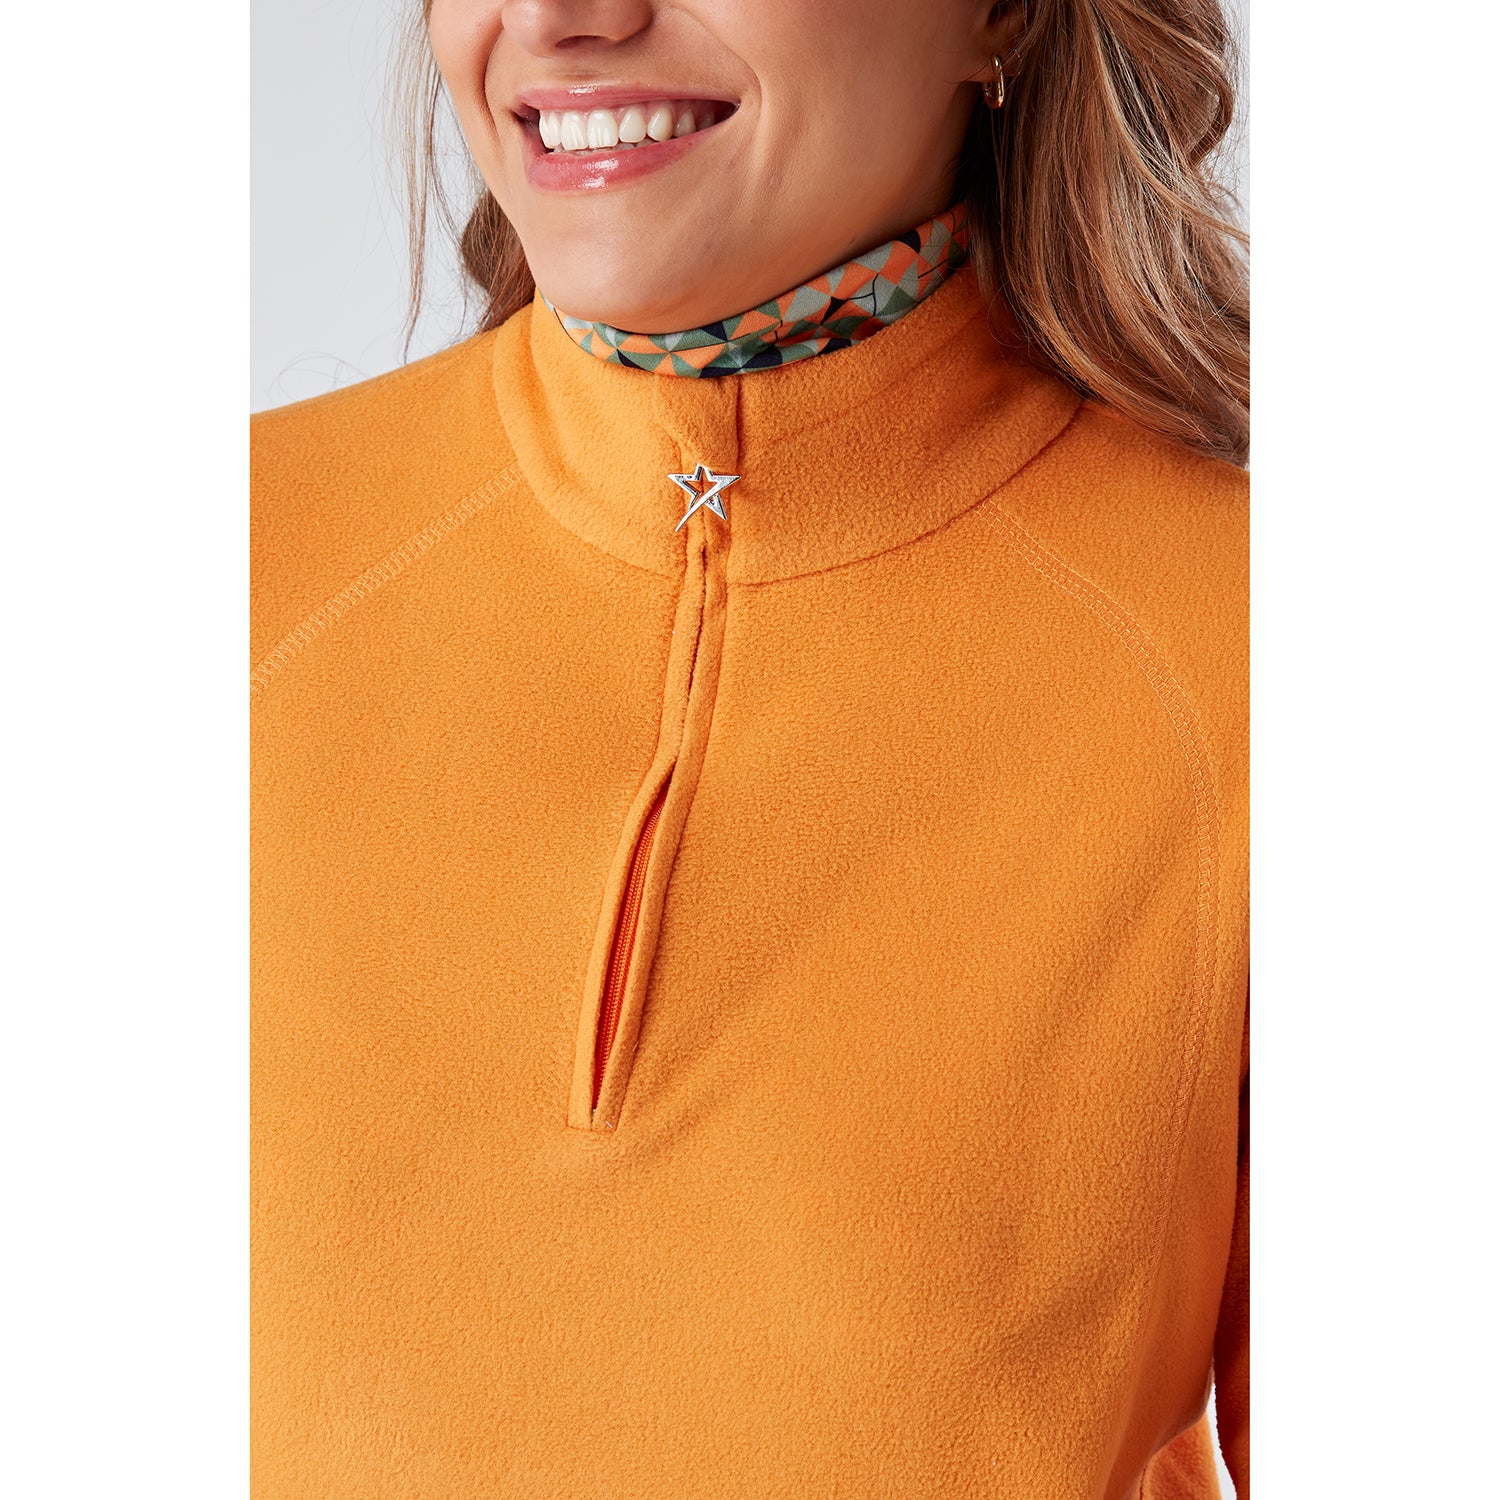 Swing Out Sister Ultra-Soft 1/4 Zip Fleece in Apricot Crush